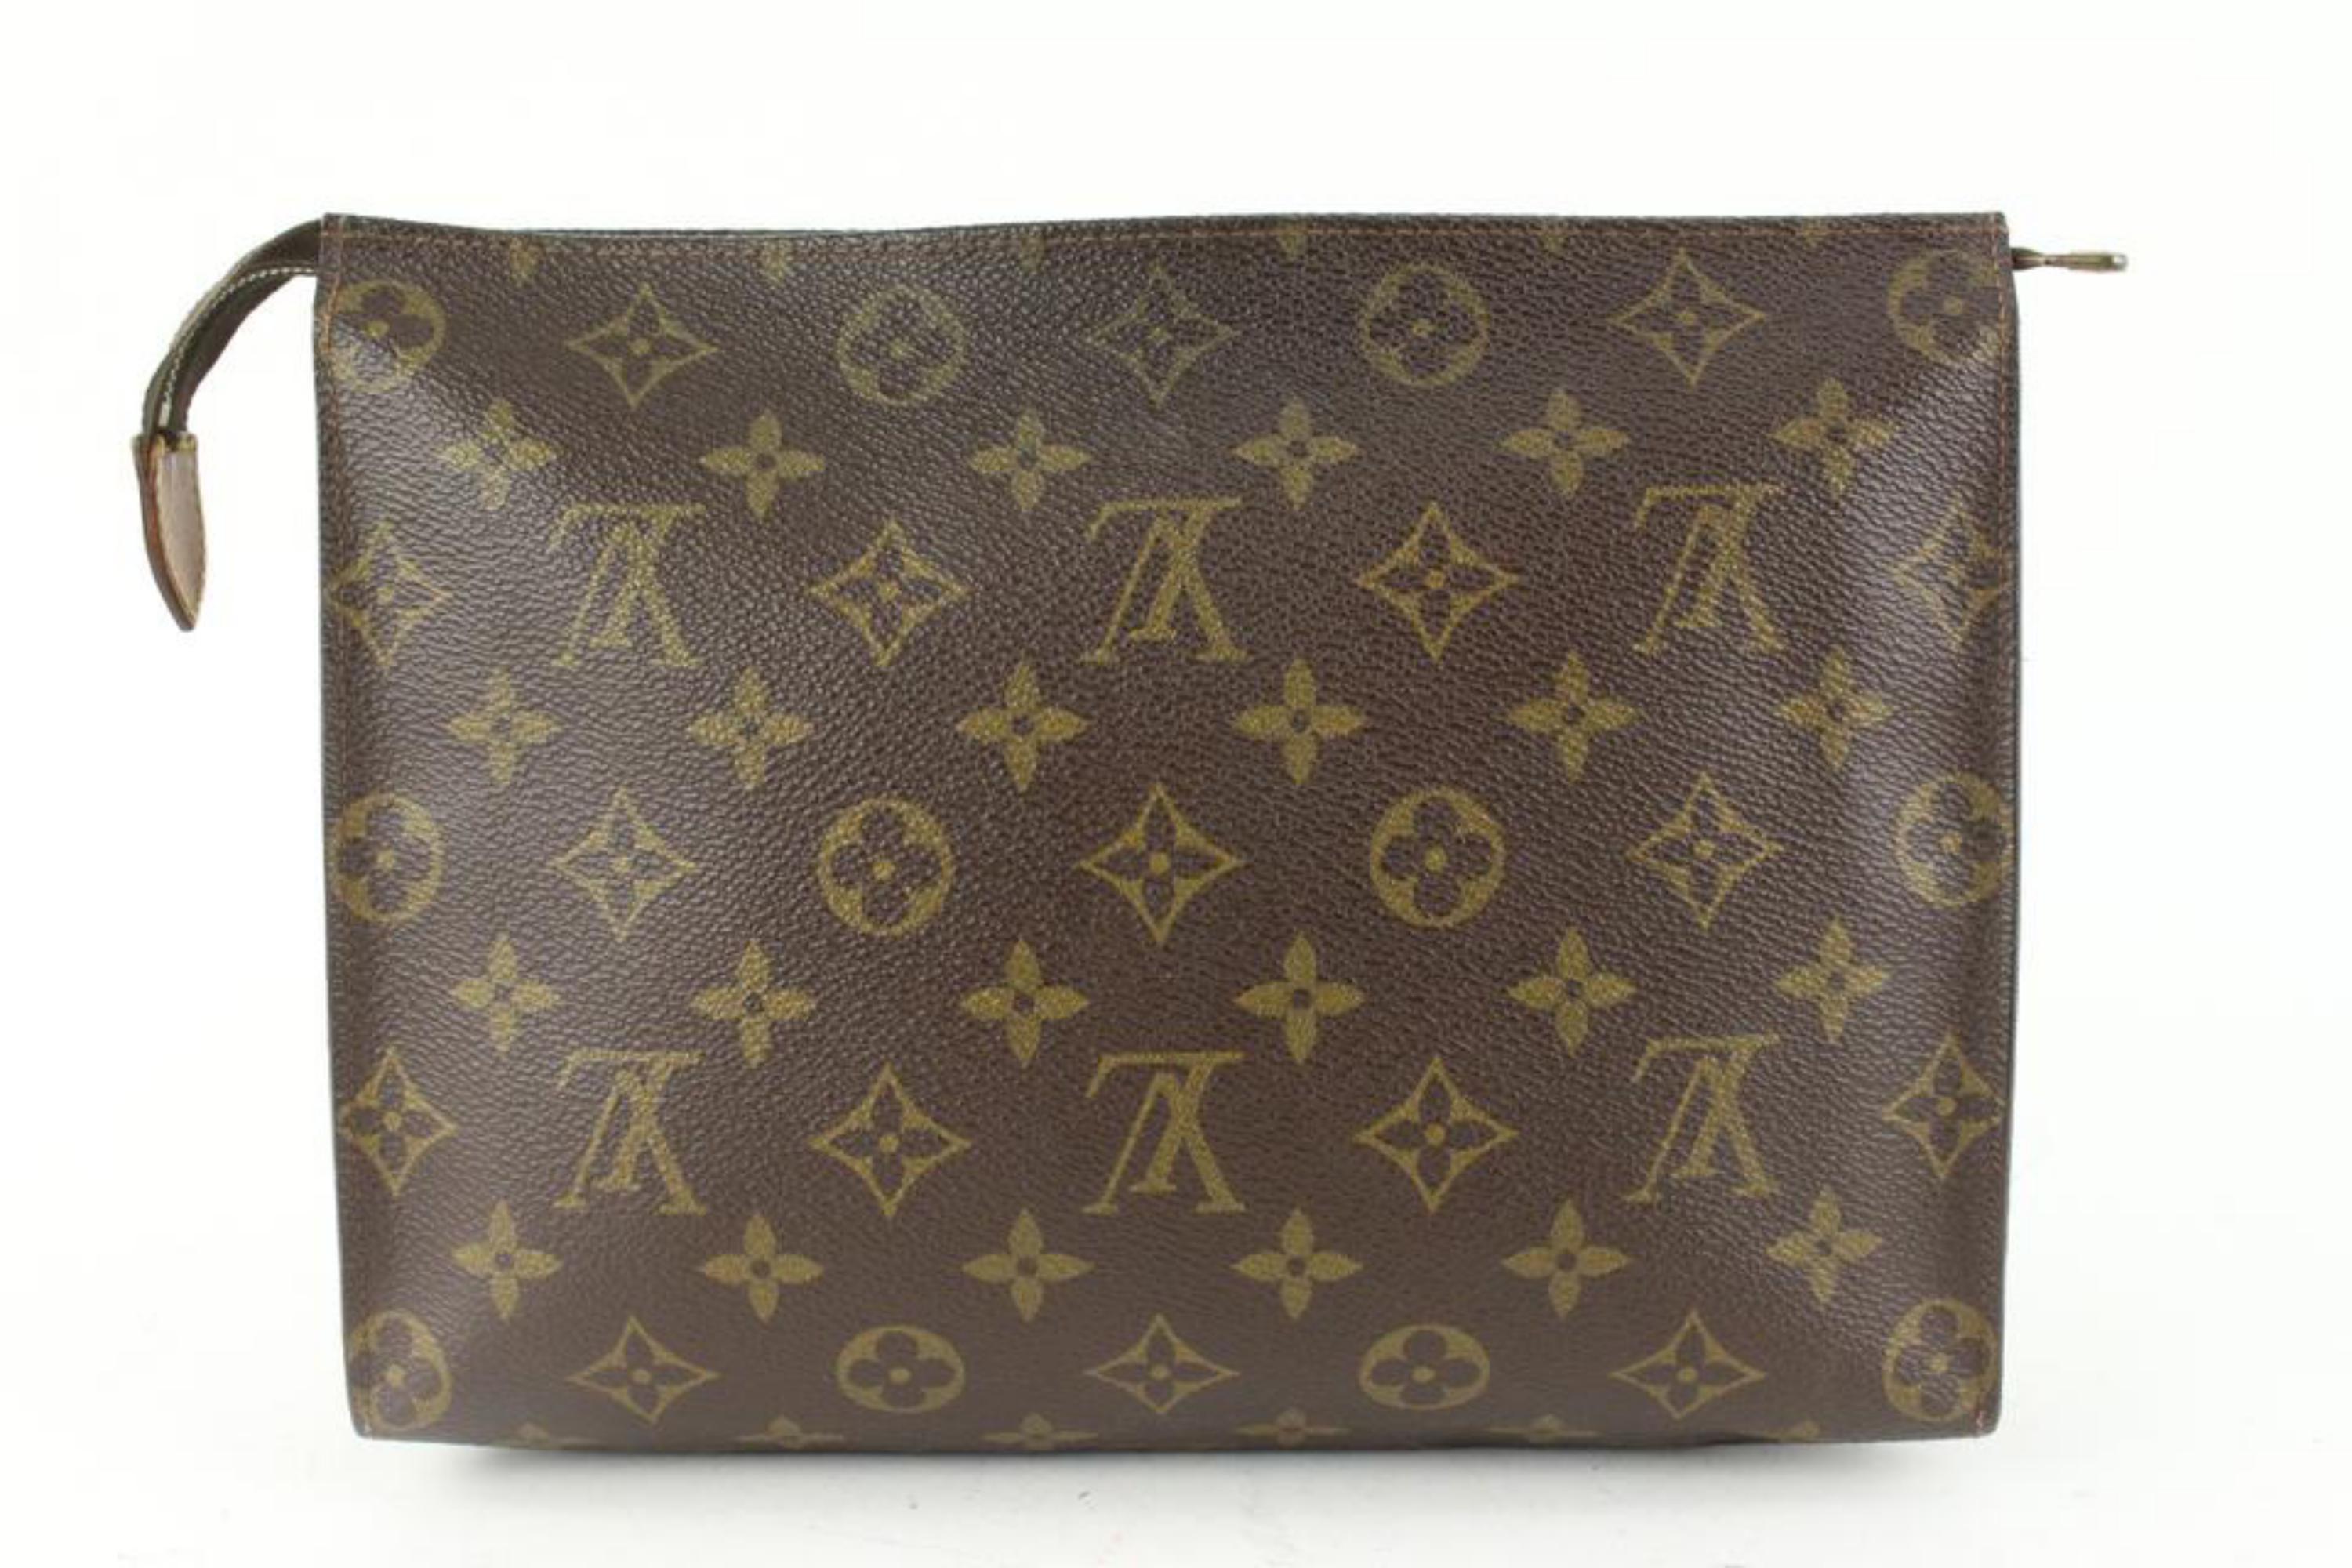 Louis Vuitton Discontinued Monogram Toiletry Pouch 26 Poche Toilette 111lv16 In Good Condition For Sale In Dix hills, NY